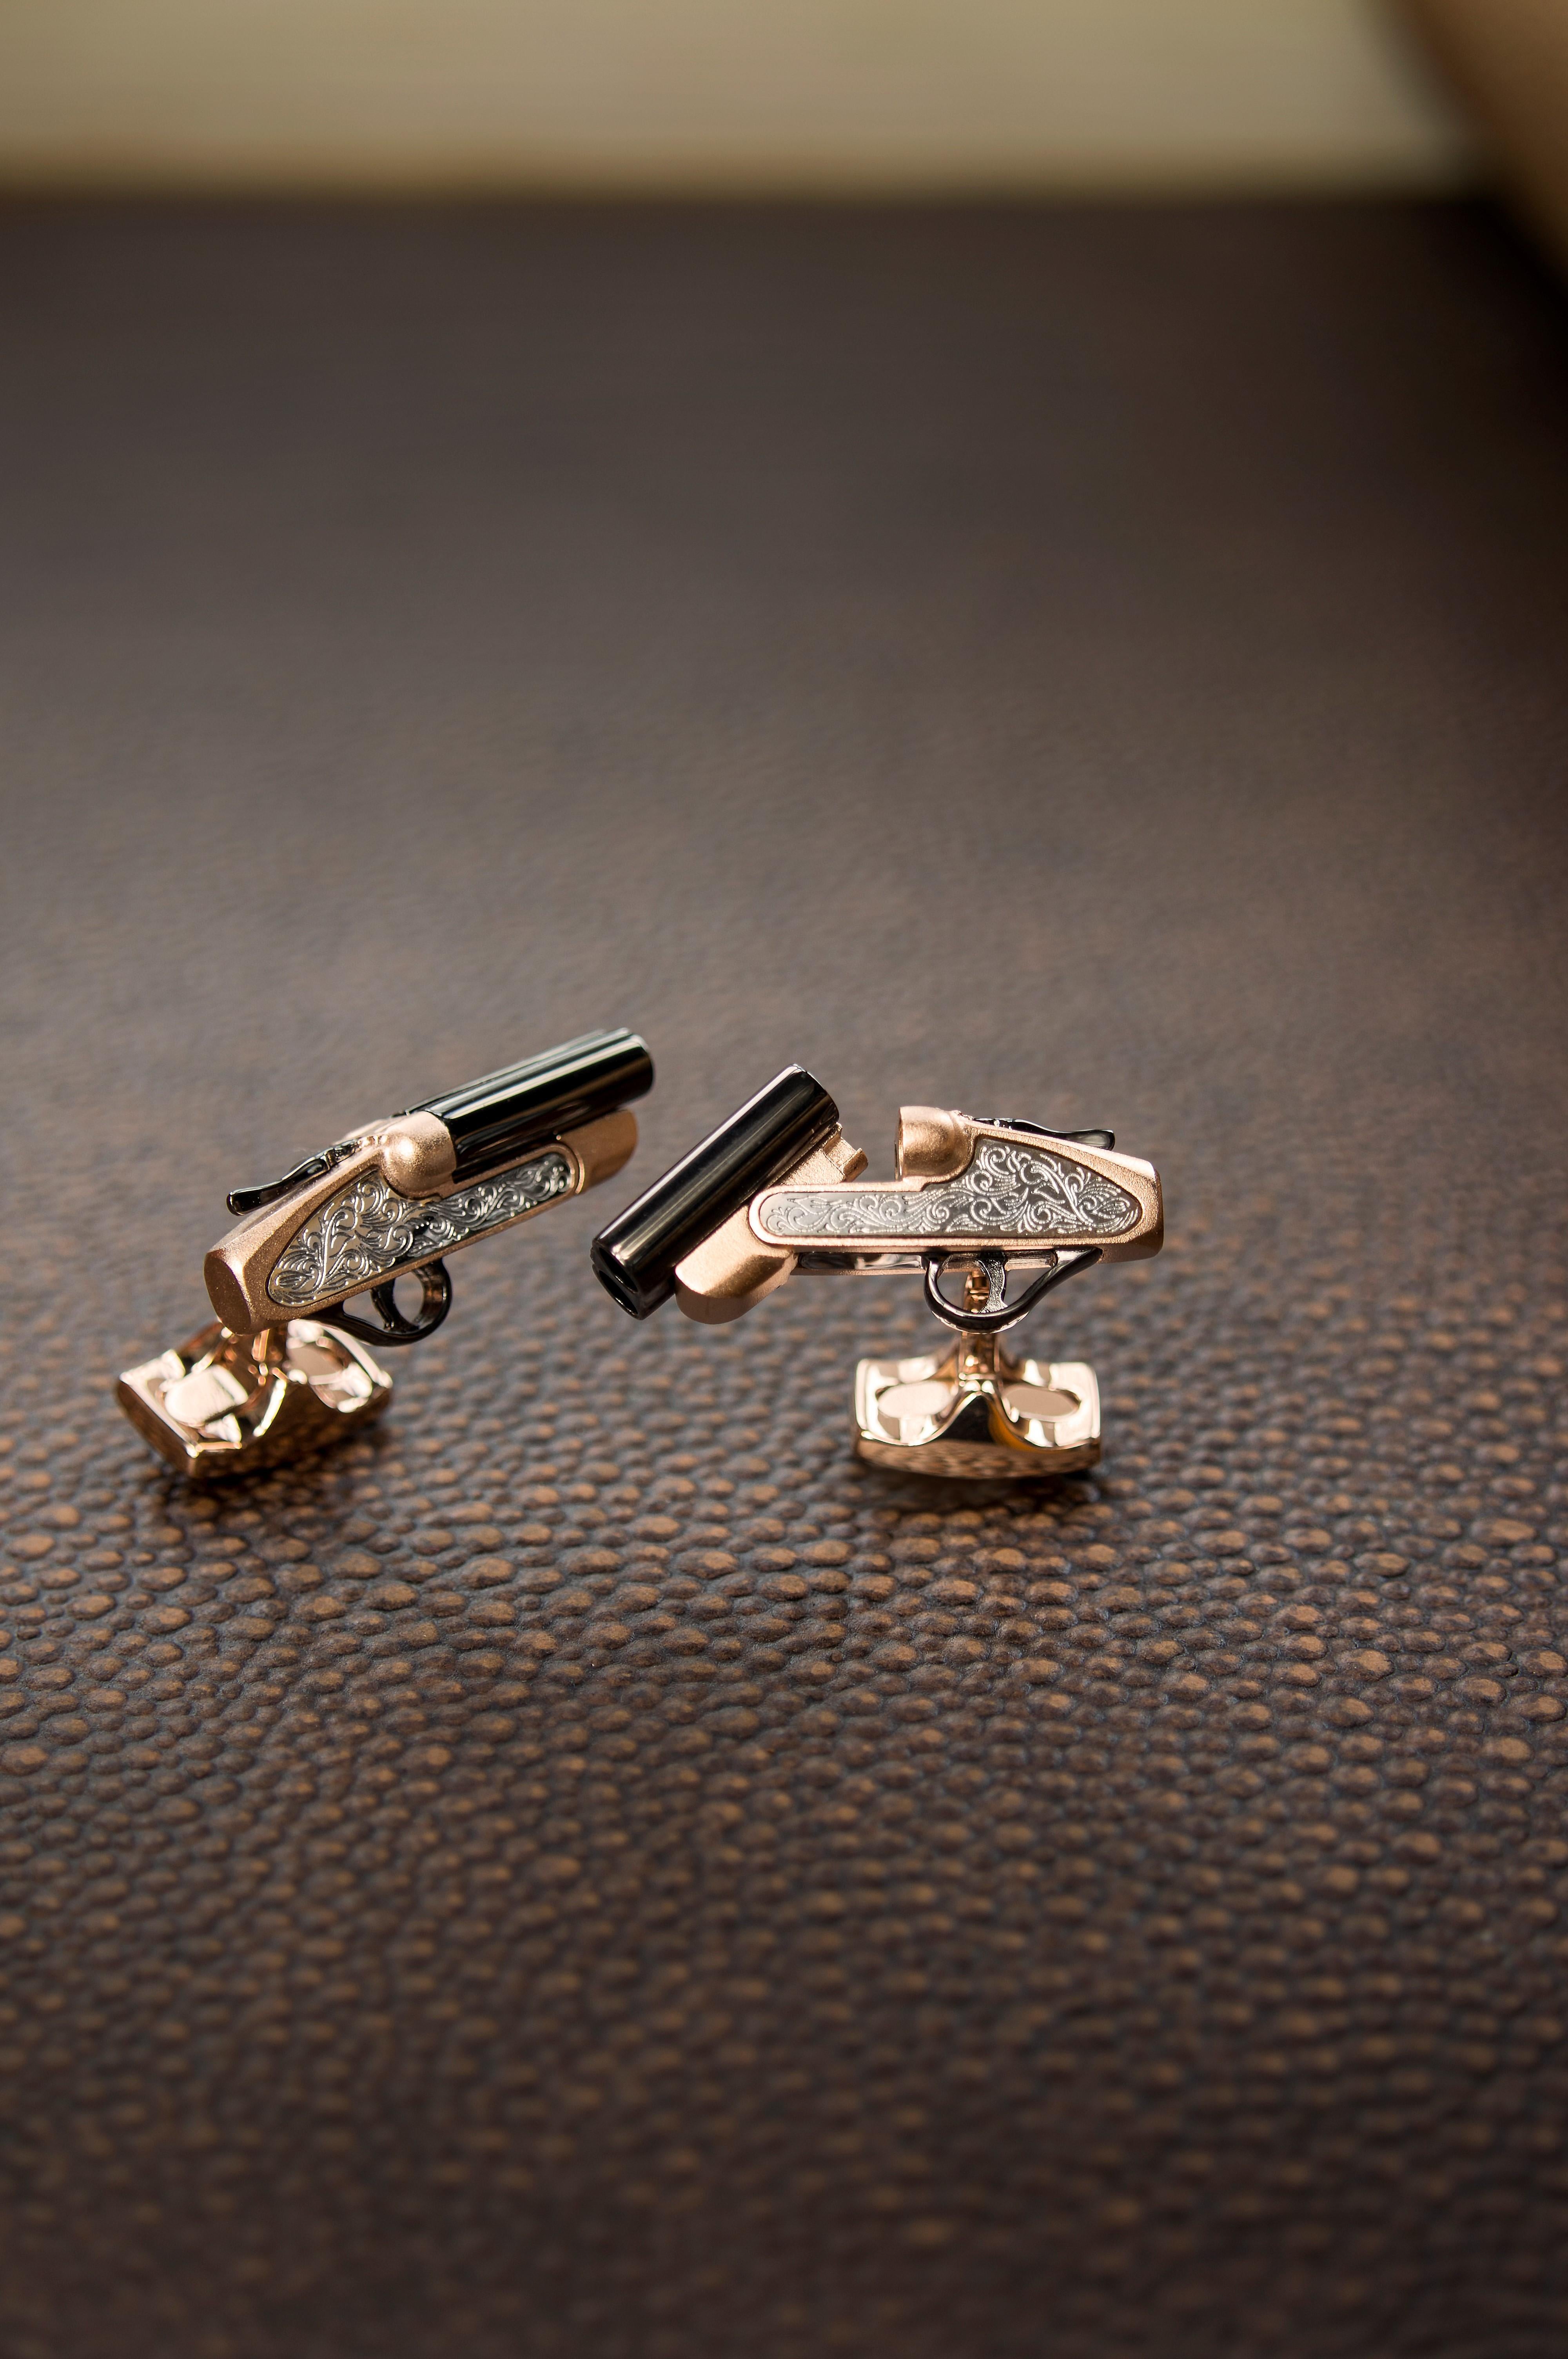 DEAKIN & FRANCIS, Piccadilly Arcade, London

As featured in Country Life Magazine - you will be right on target with these quintessentially English, 12 bore shotgun cufflinks!

With detailed side lock engraving, you can even spring the lever and